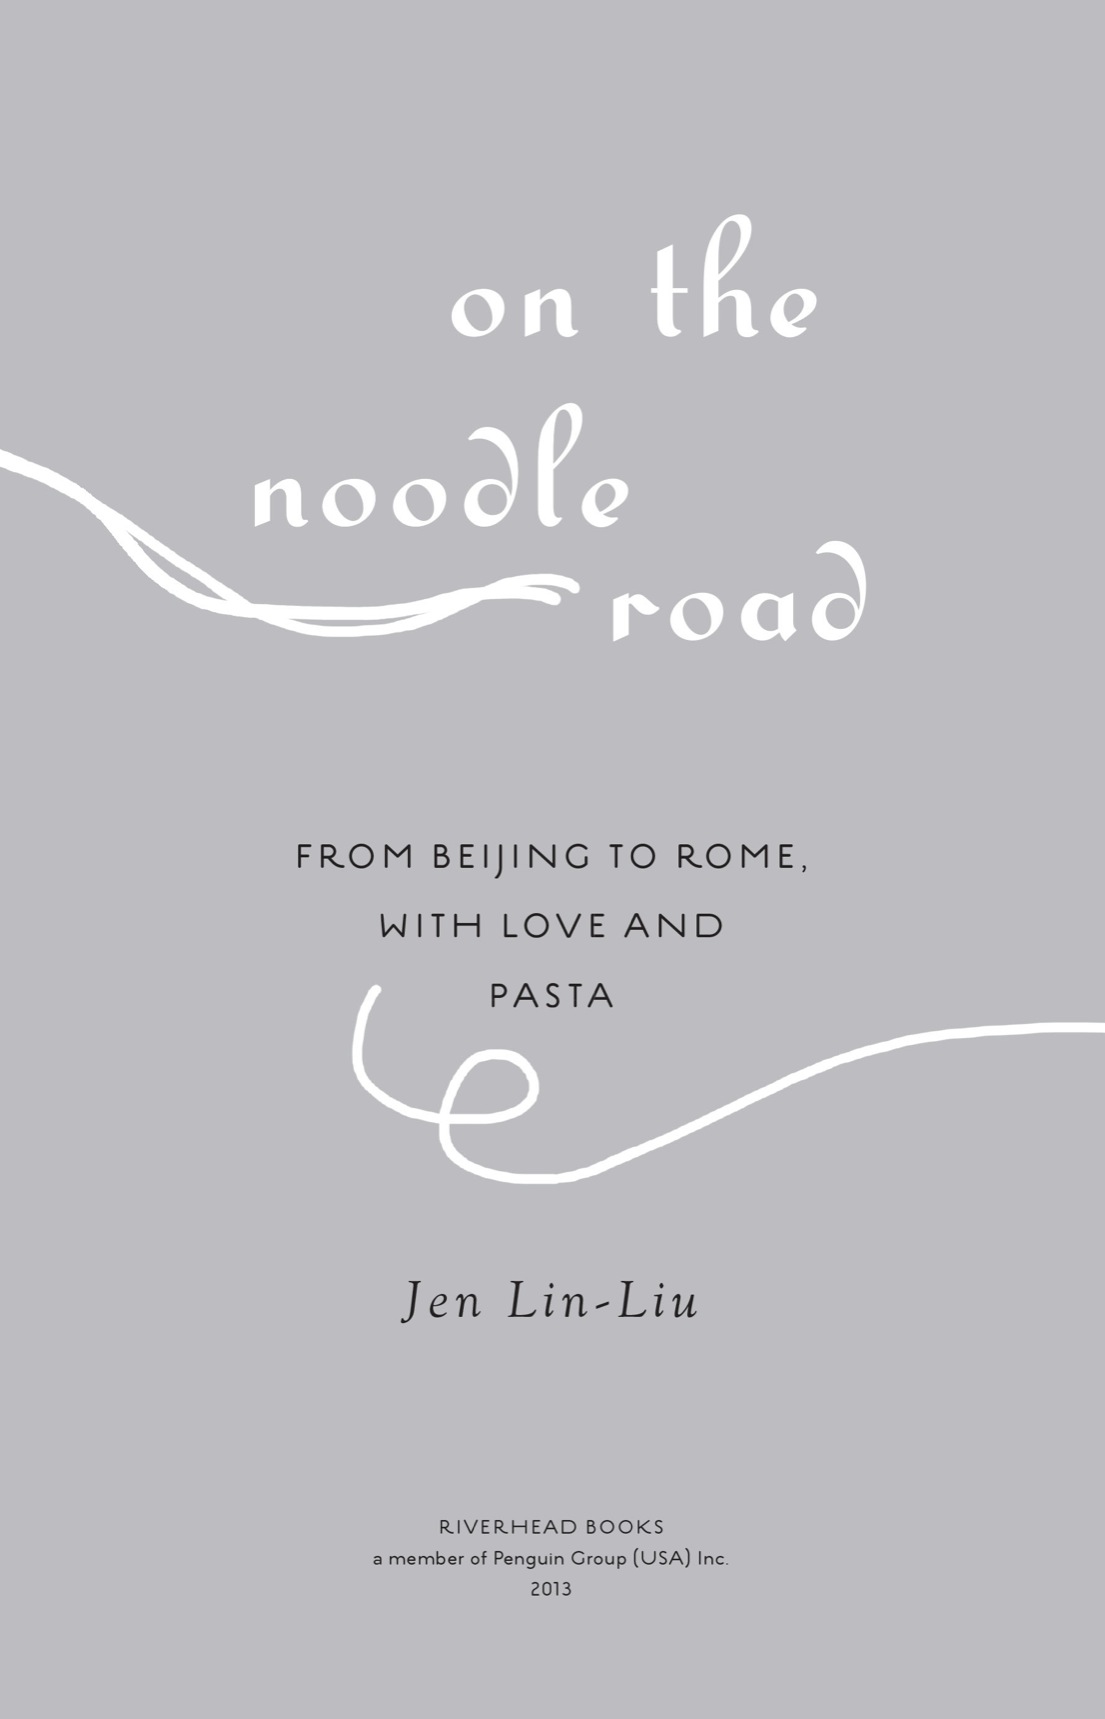 On the Noodle Road From Beijing to Rome with Love and Pasta - image 2